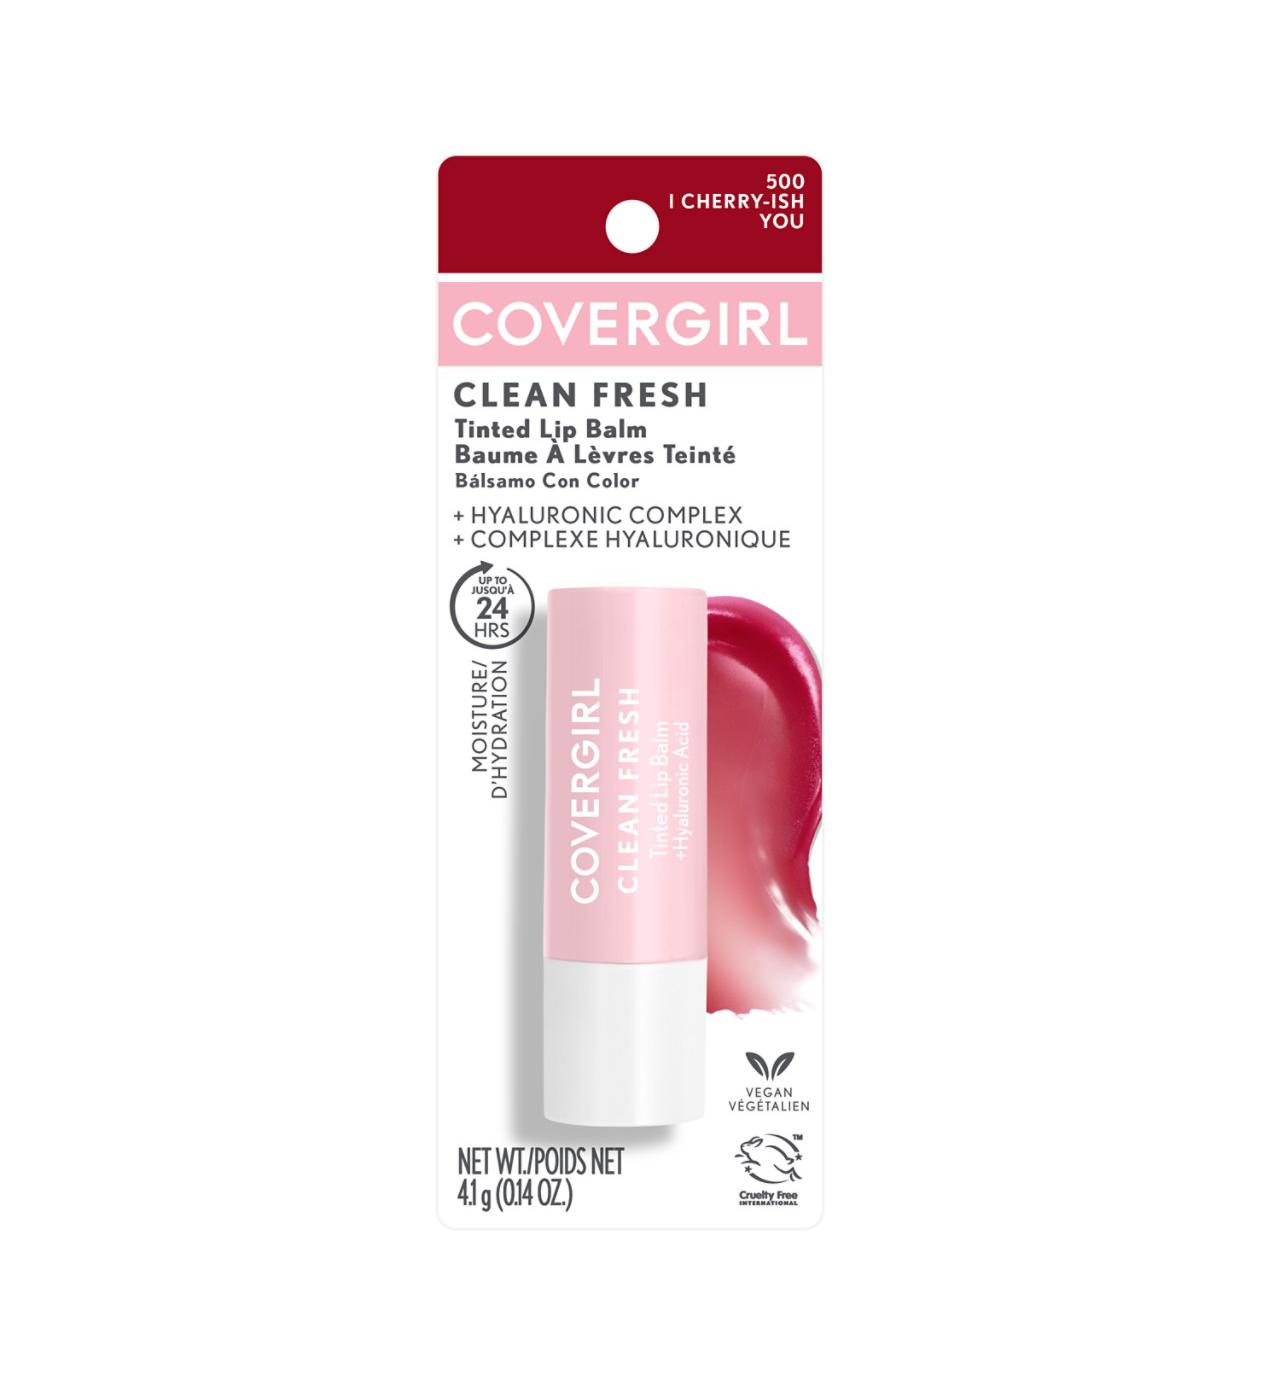 Covergirl Clean Fresh Tinted Lip Balm - I Cherry-ish You; image 1 of 2